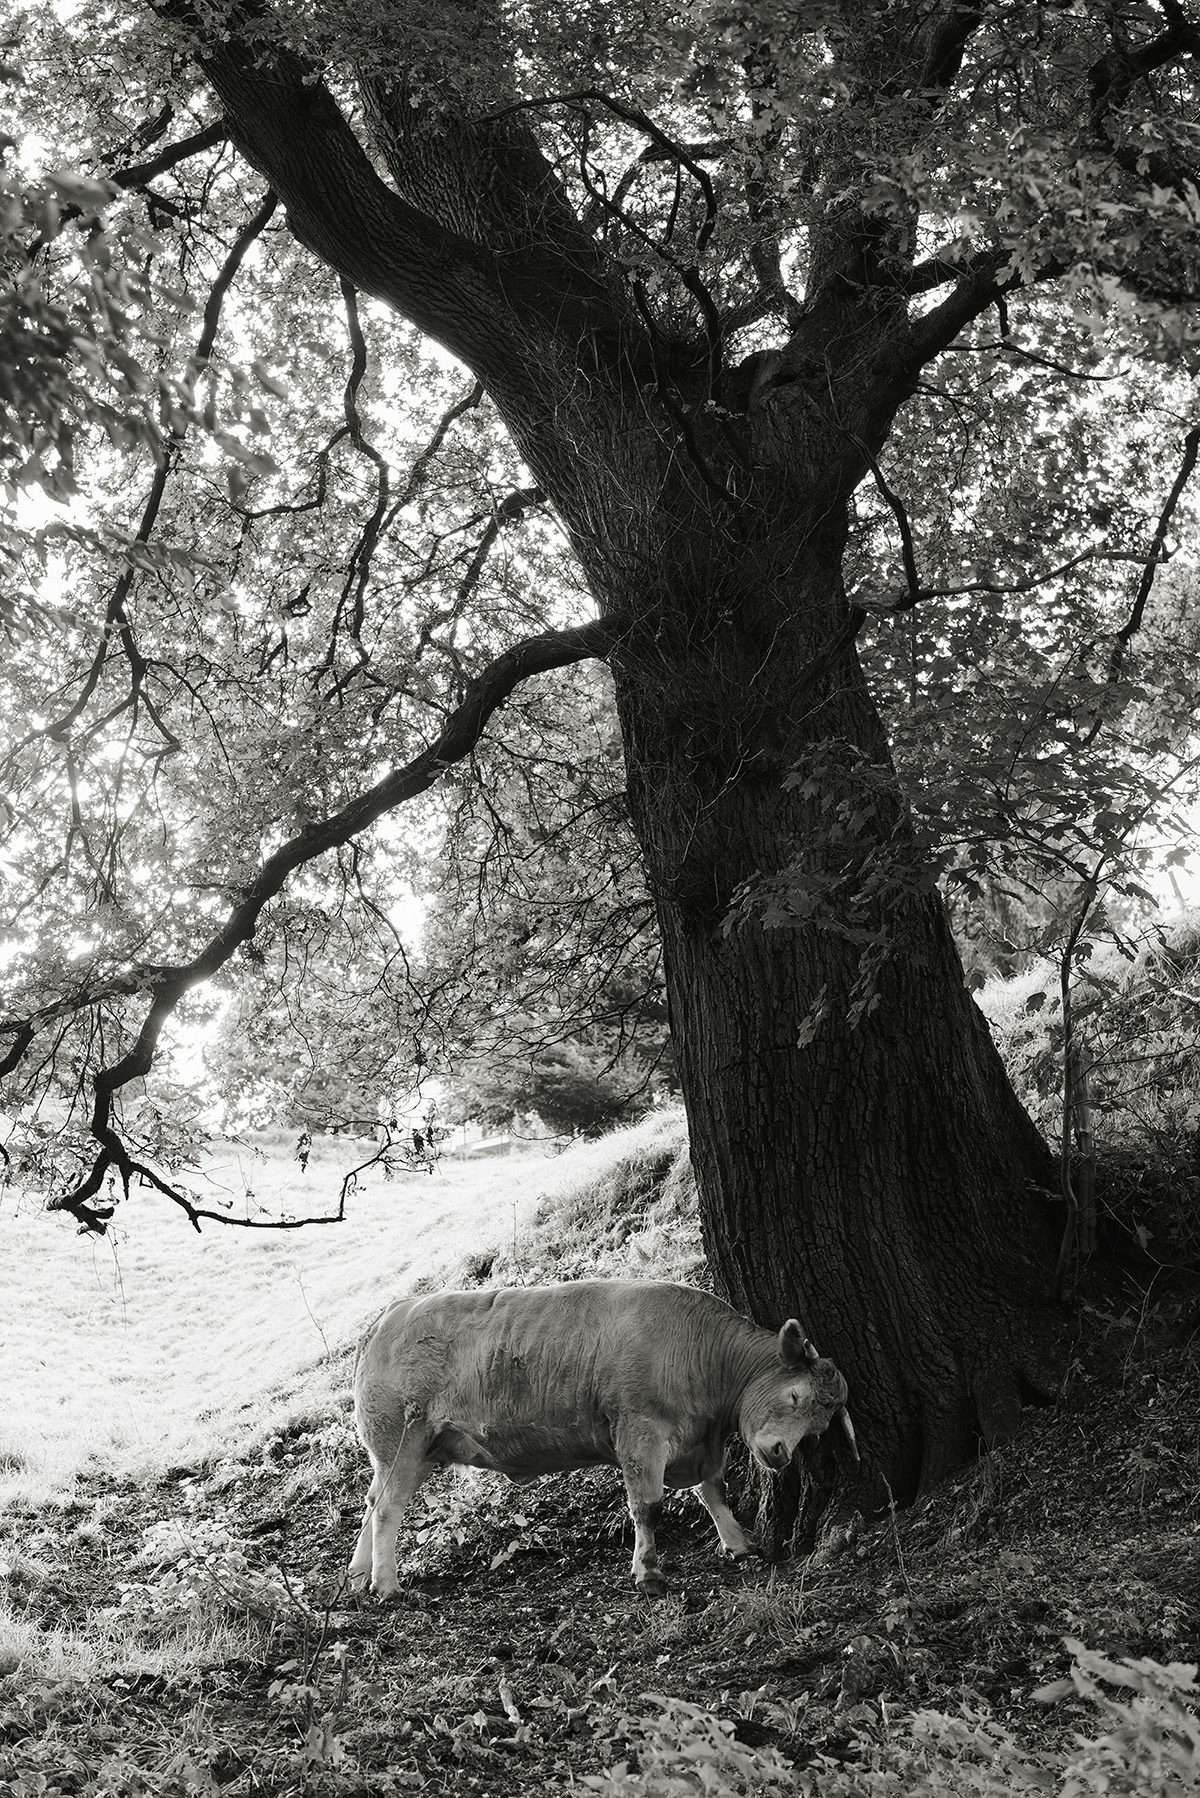 Black and white photograph shows a cow scratching its head on a tree, taken from Yana Wernicke's book Companions